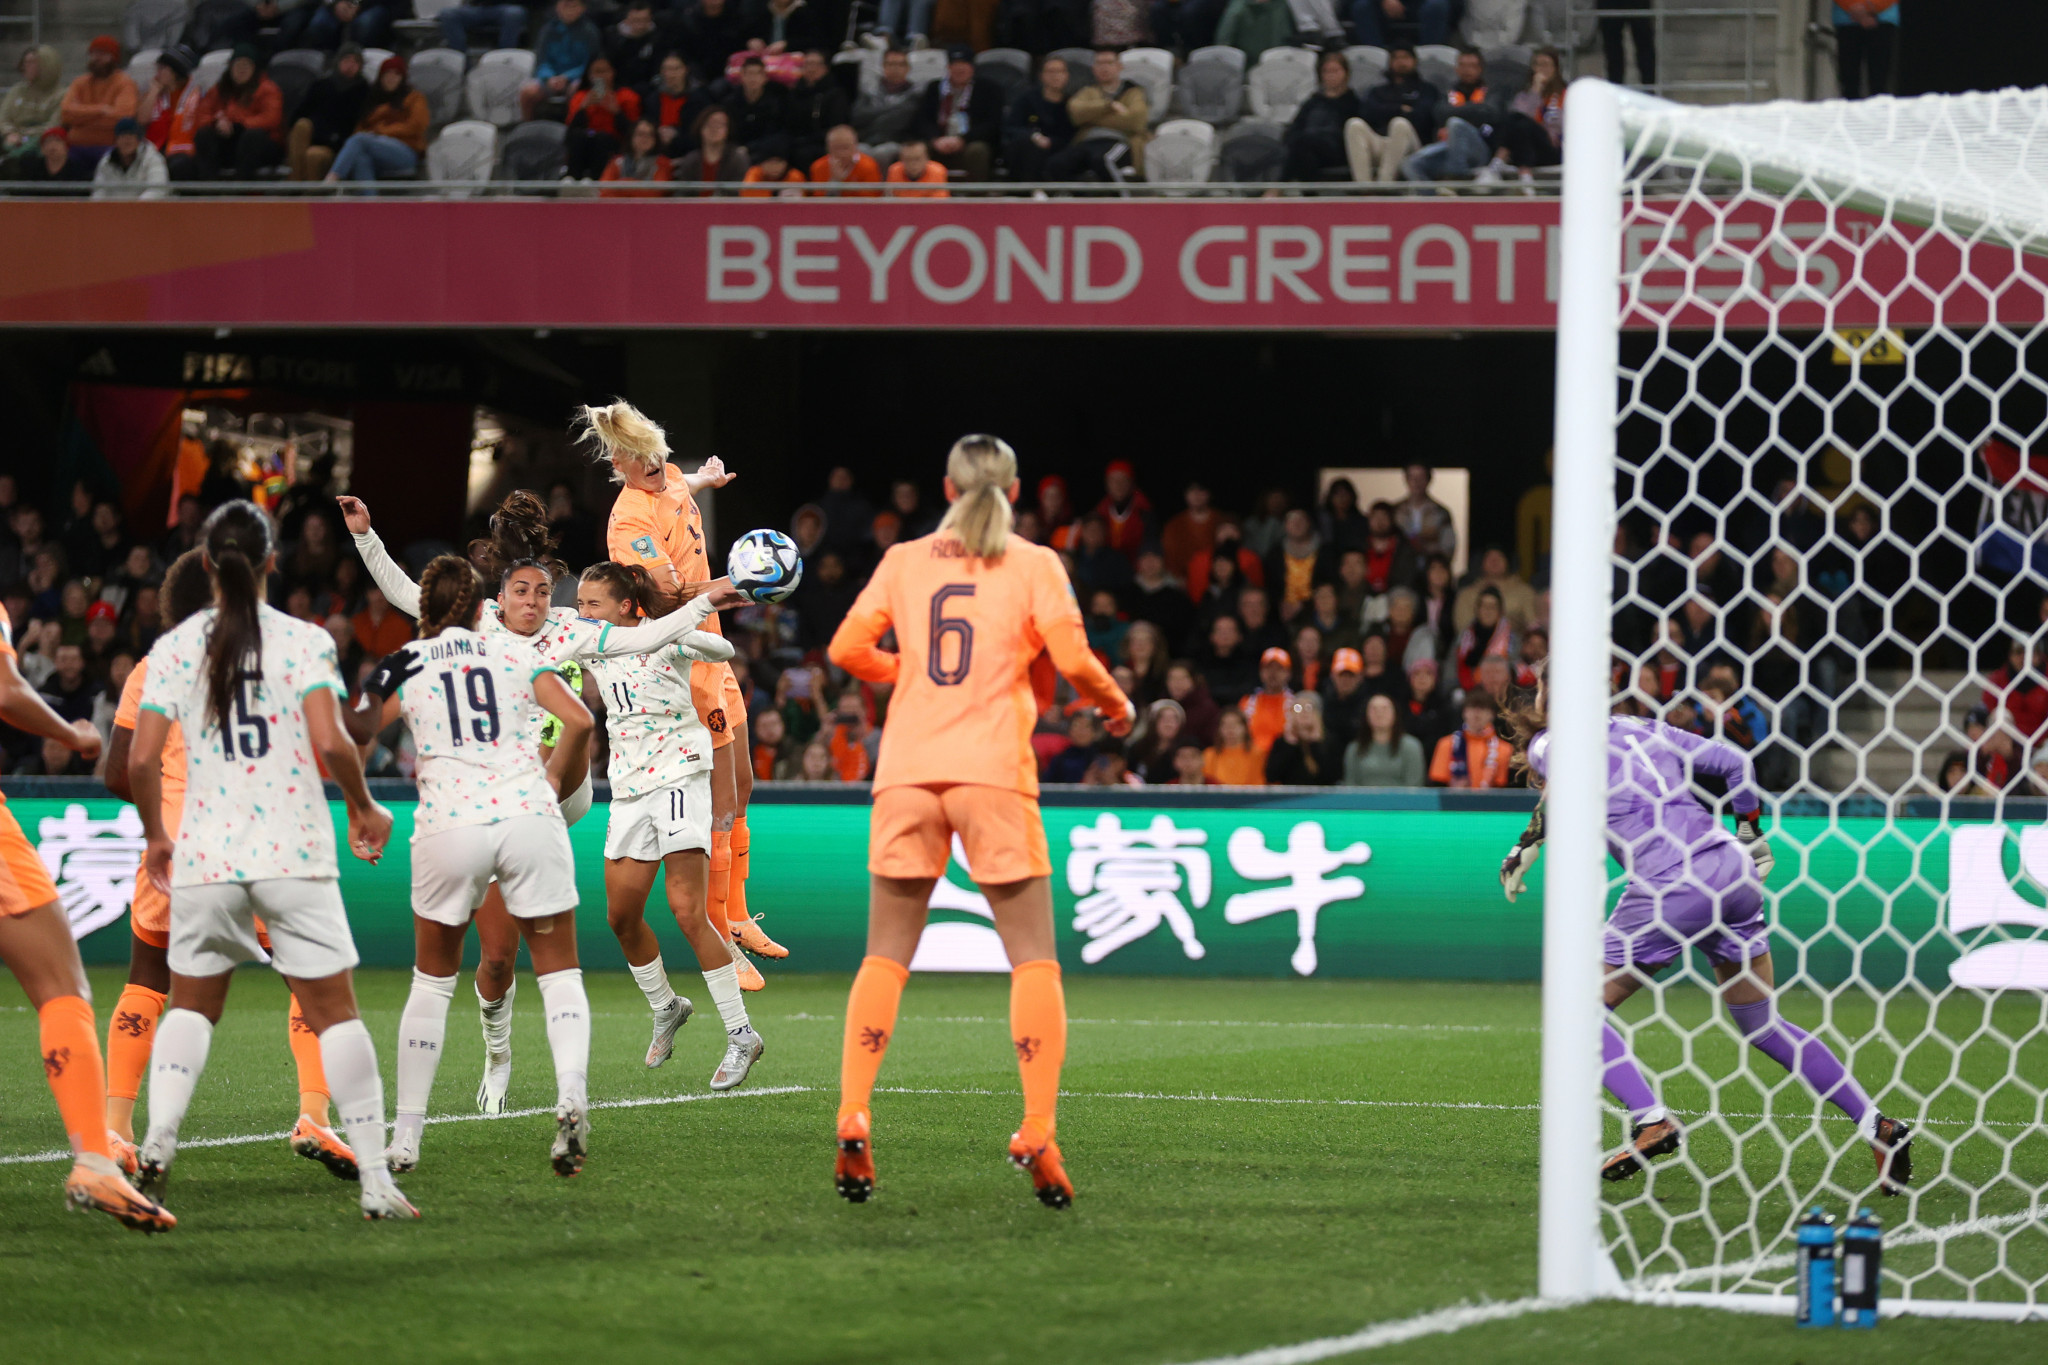 Stefanie van der Gragt, second right player in orange, headed home the only goal of the game to help 2019 runners-up The Netherlands beat Portugal 1-0 ©Getty Images 